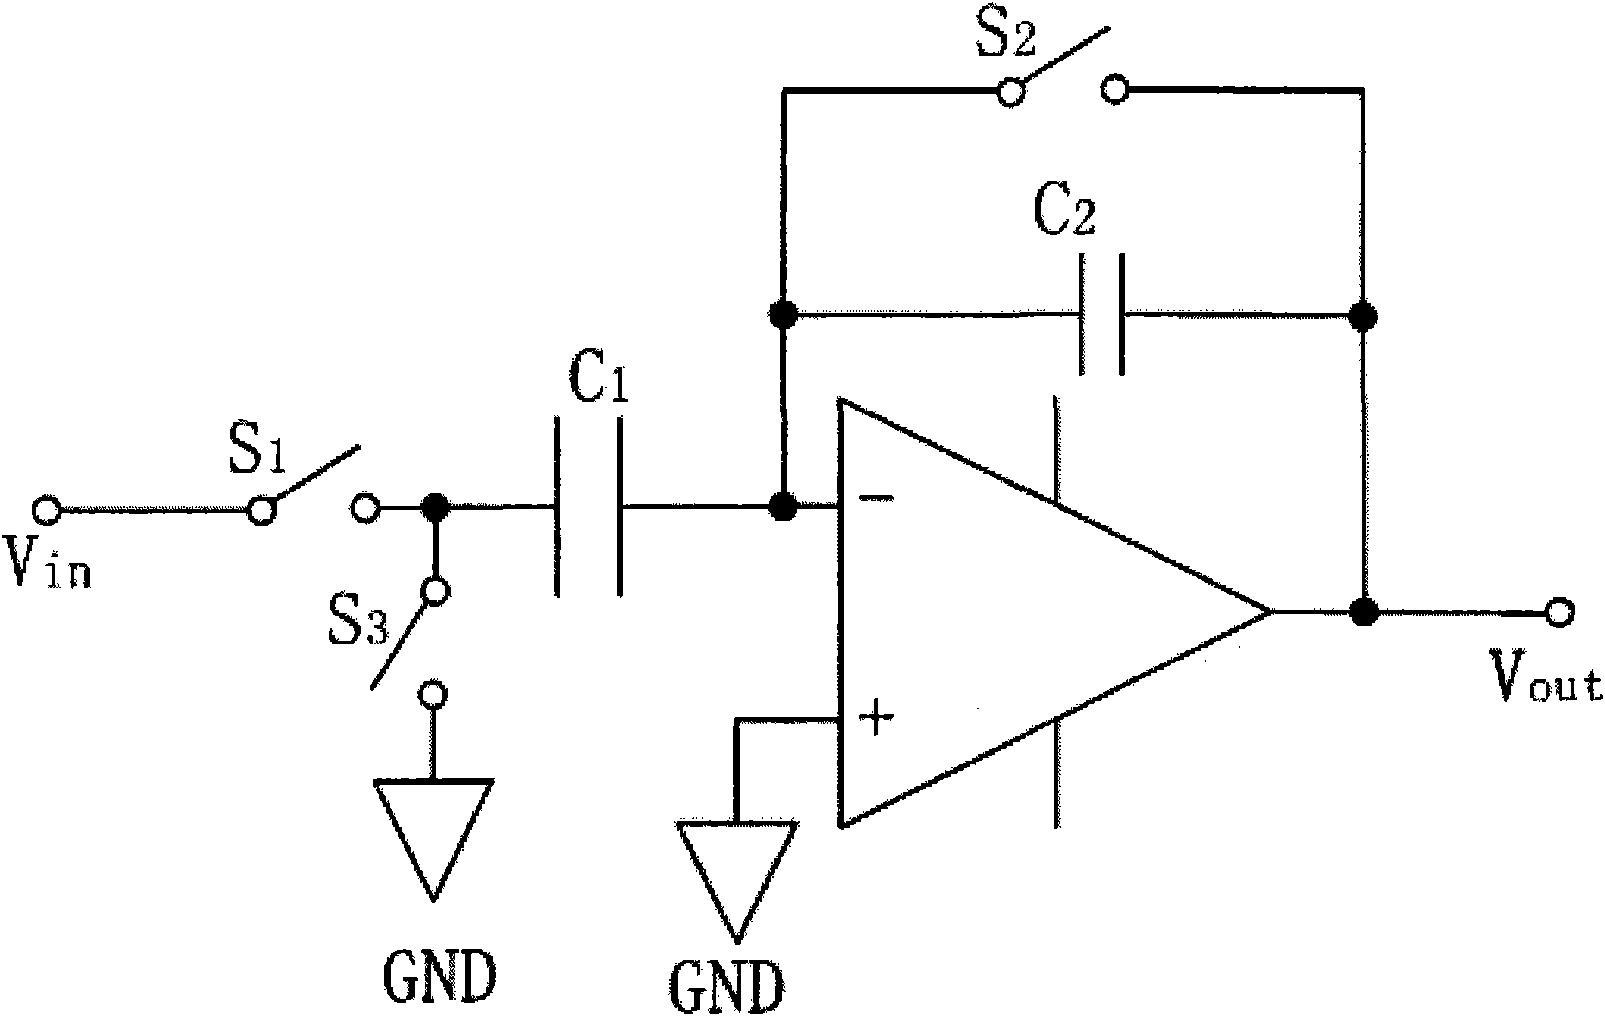 Sampling hold circuit applied to analogue-to-digital converter